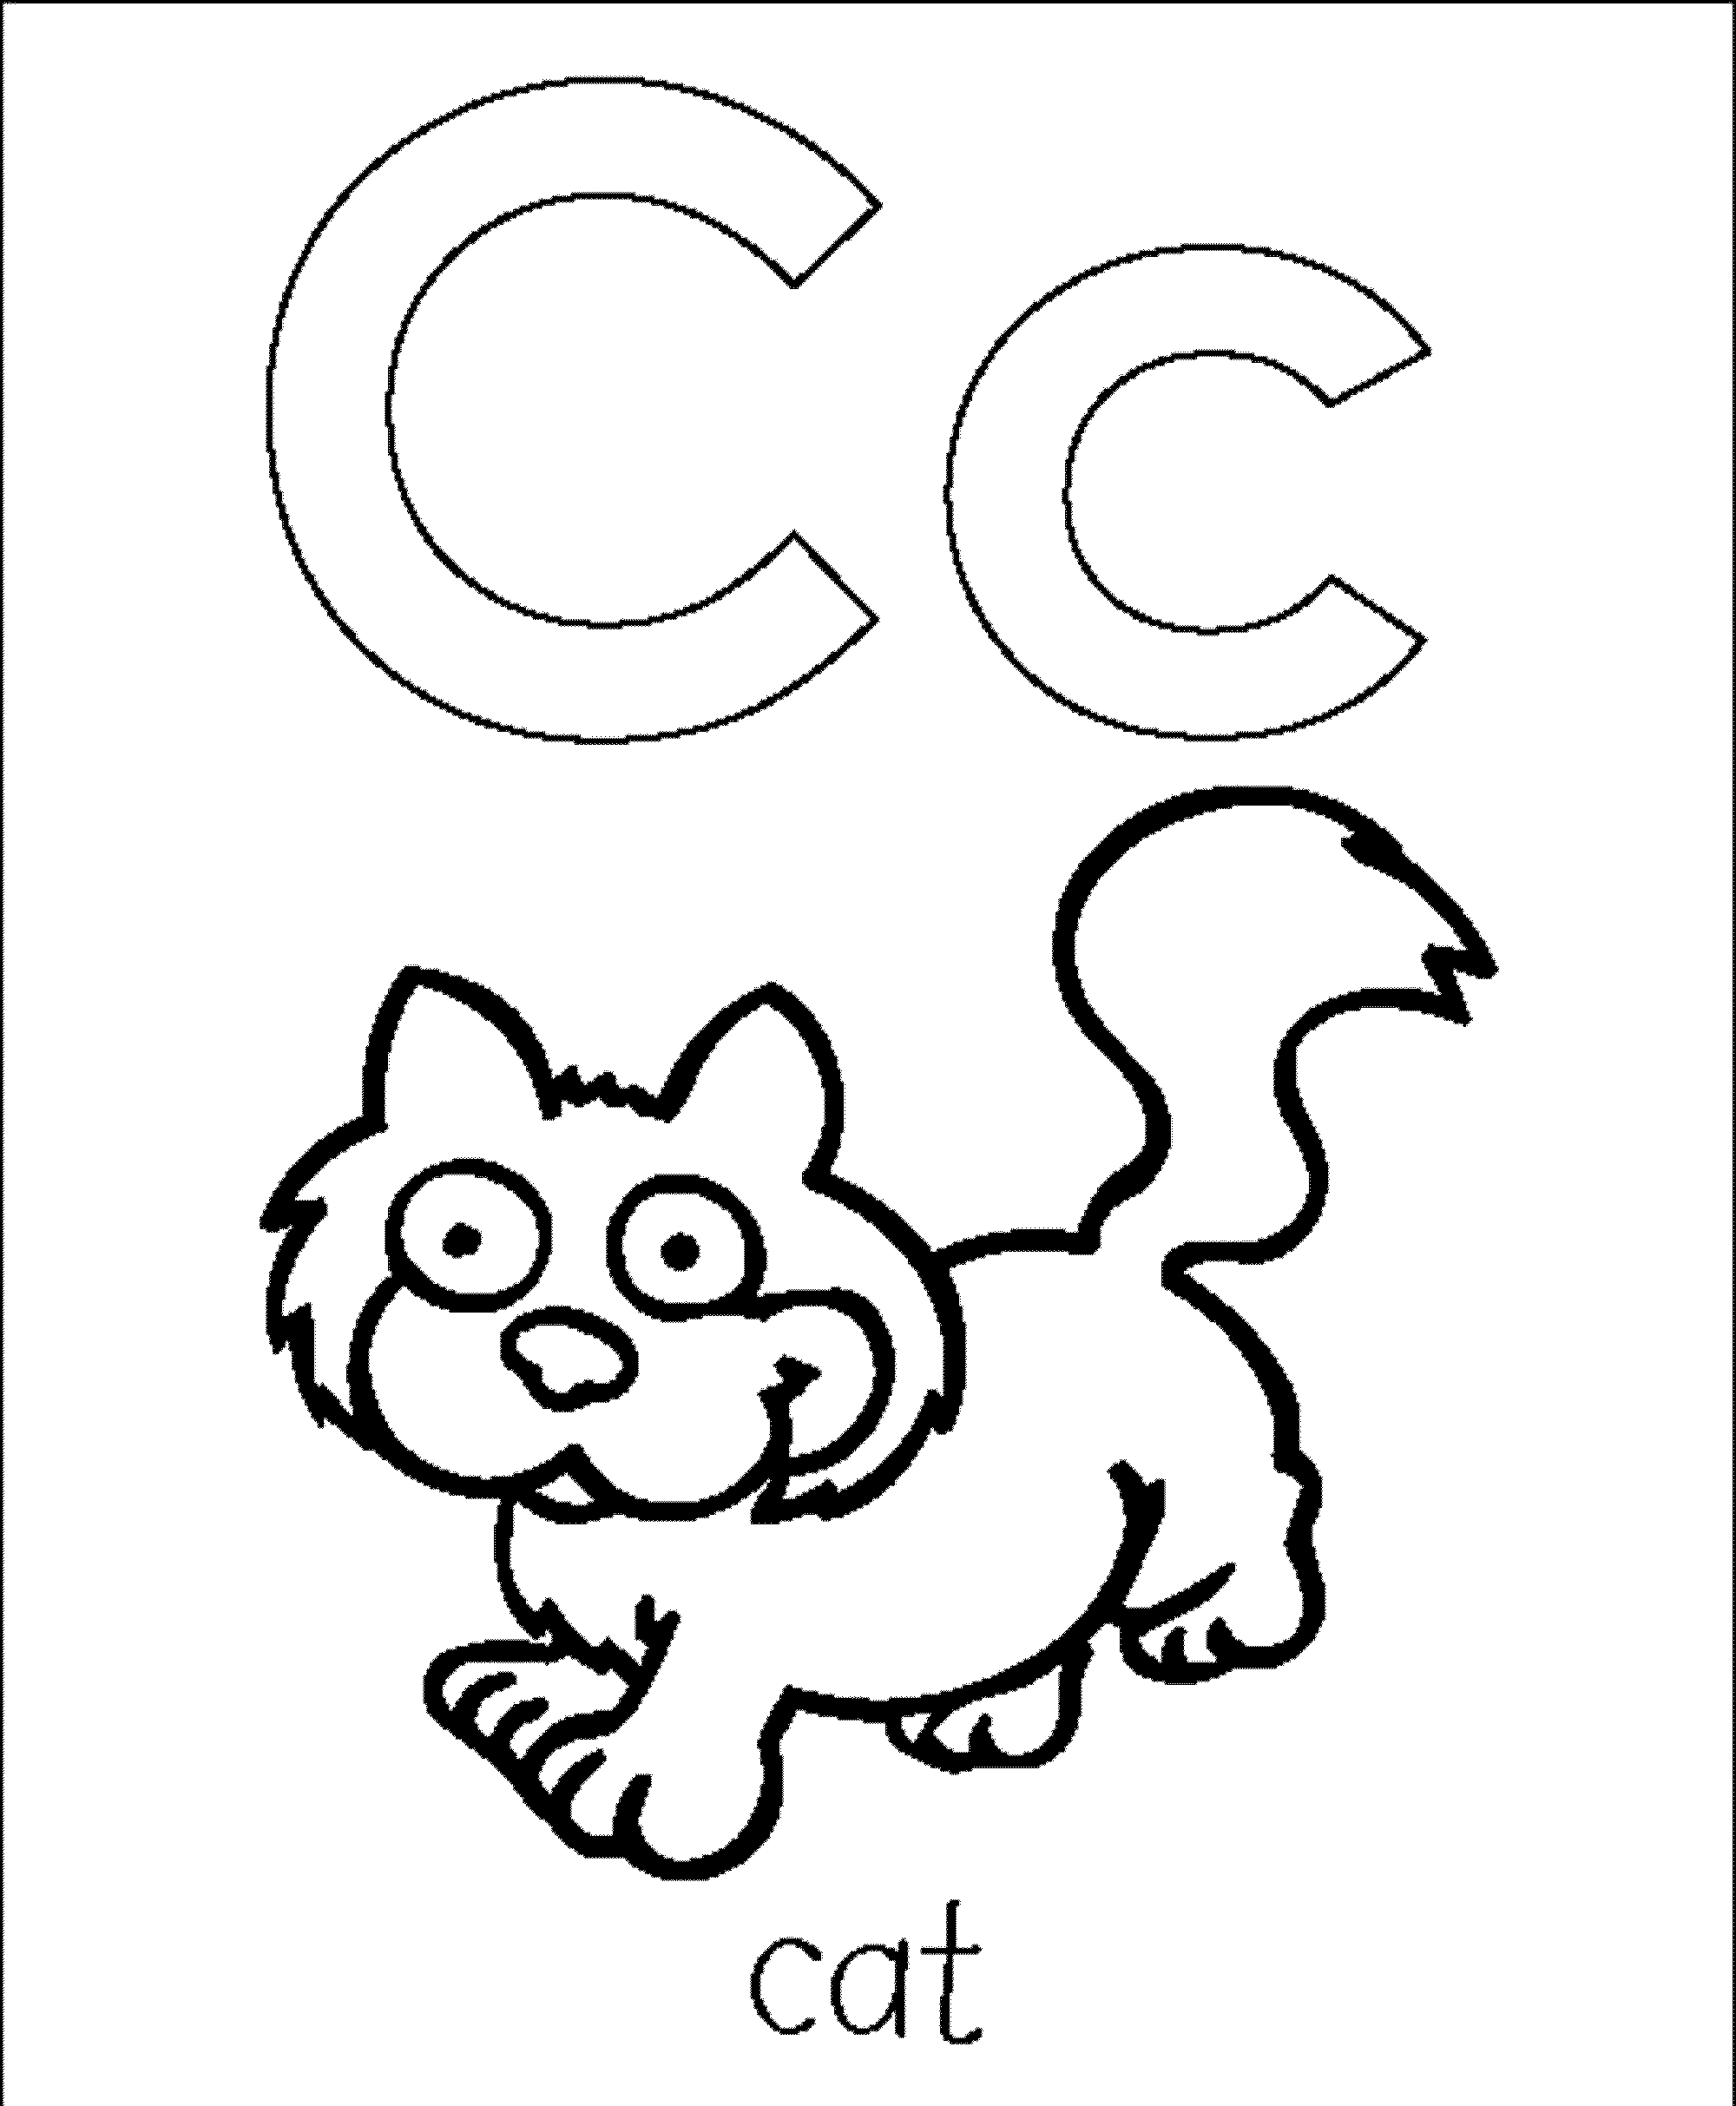 abc coloring page - Printable Kids Colouring Pages